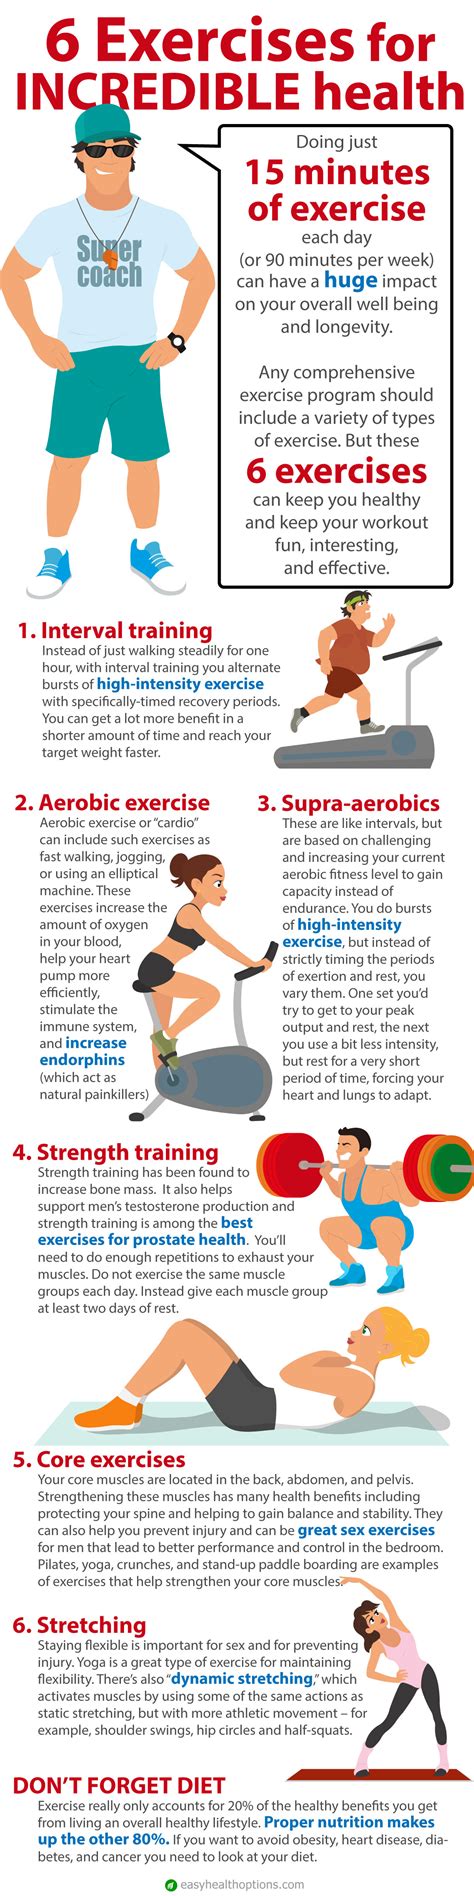 6 Exercises For Incredible Health Infographic Easy Health Options®